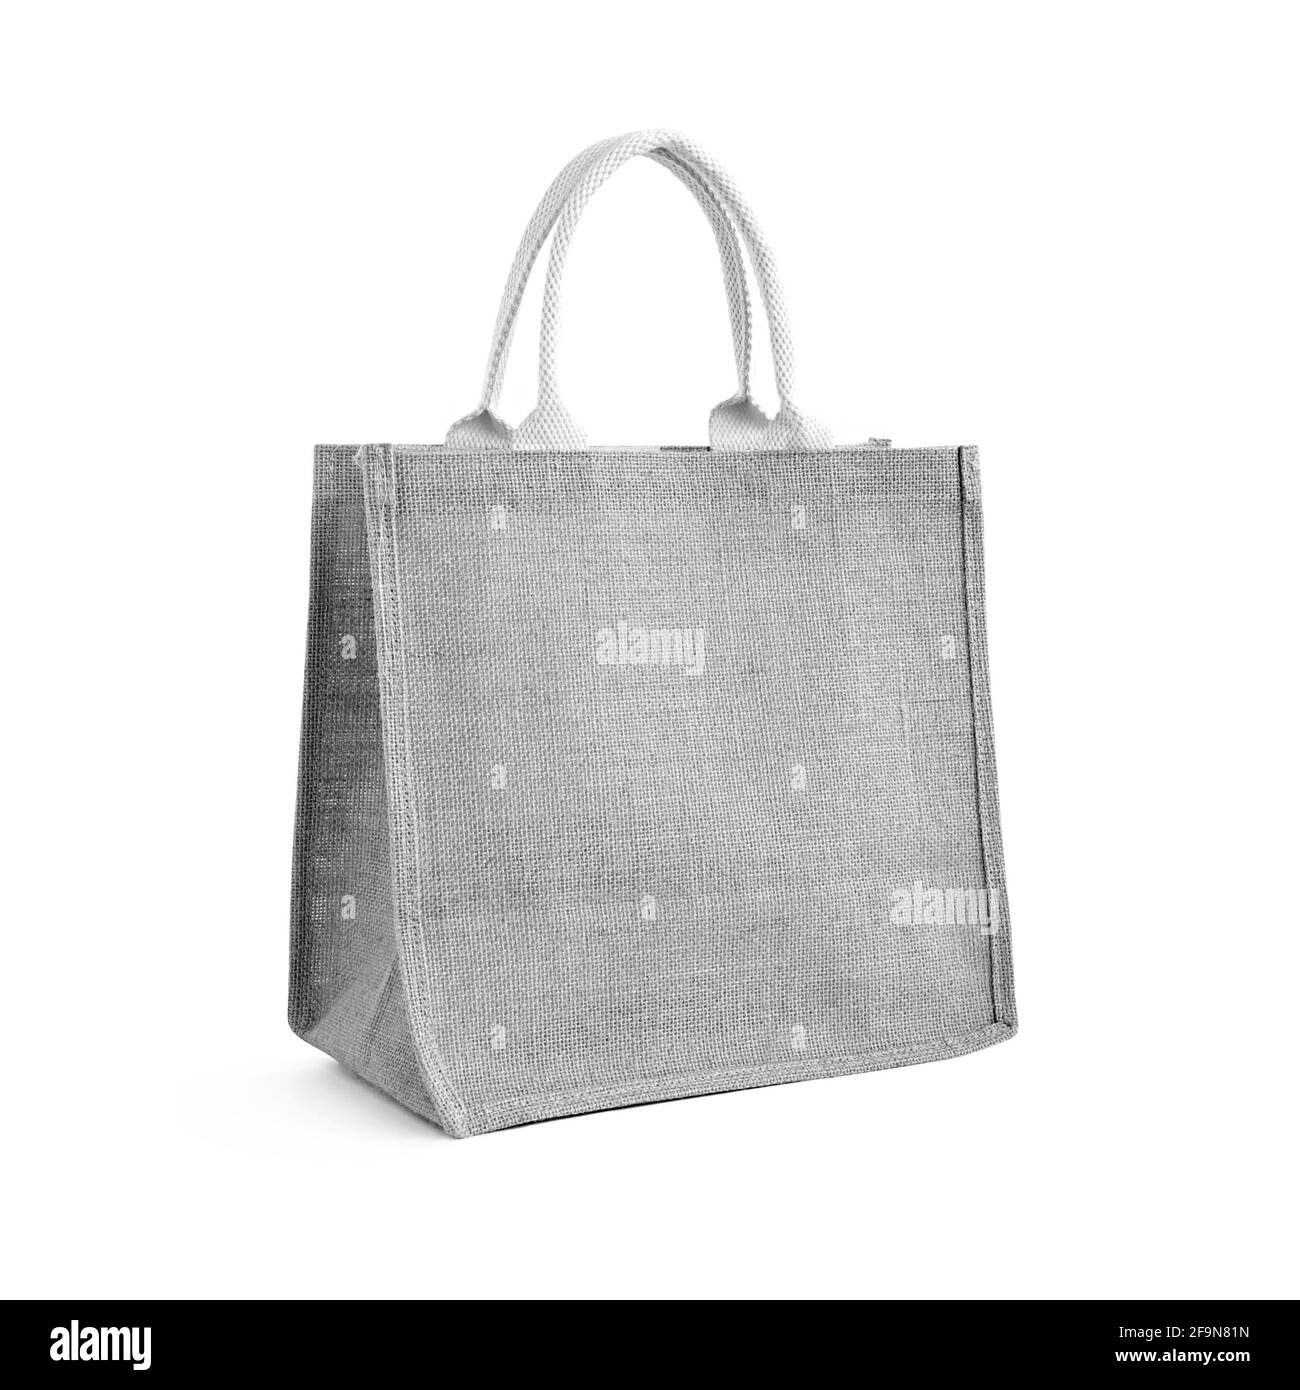 Hessian or jute bag - reusable gray shopping bag with loop handles - isolated Stock Photo